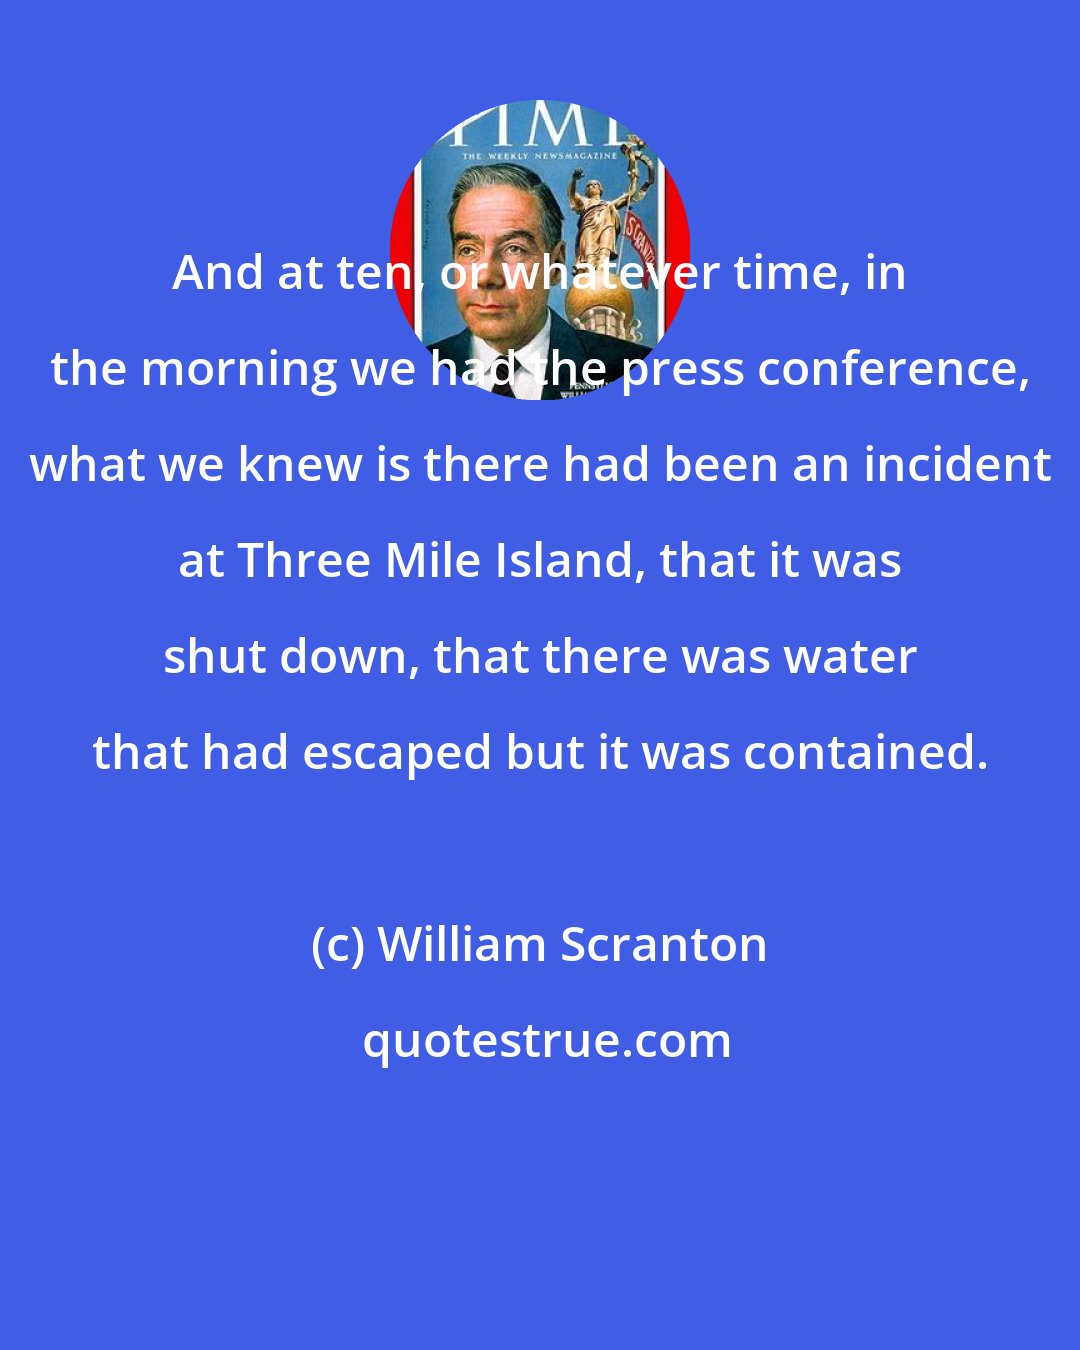 William Scranton: And at ten, or whatever time, in the morning we had the press conference, what we knew is there had been an incident at Three Mile Island, that it was shut down, that there was water that had escaped but it was contained.